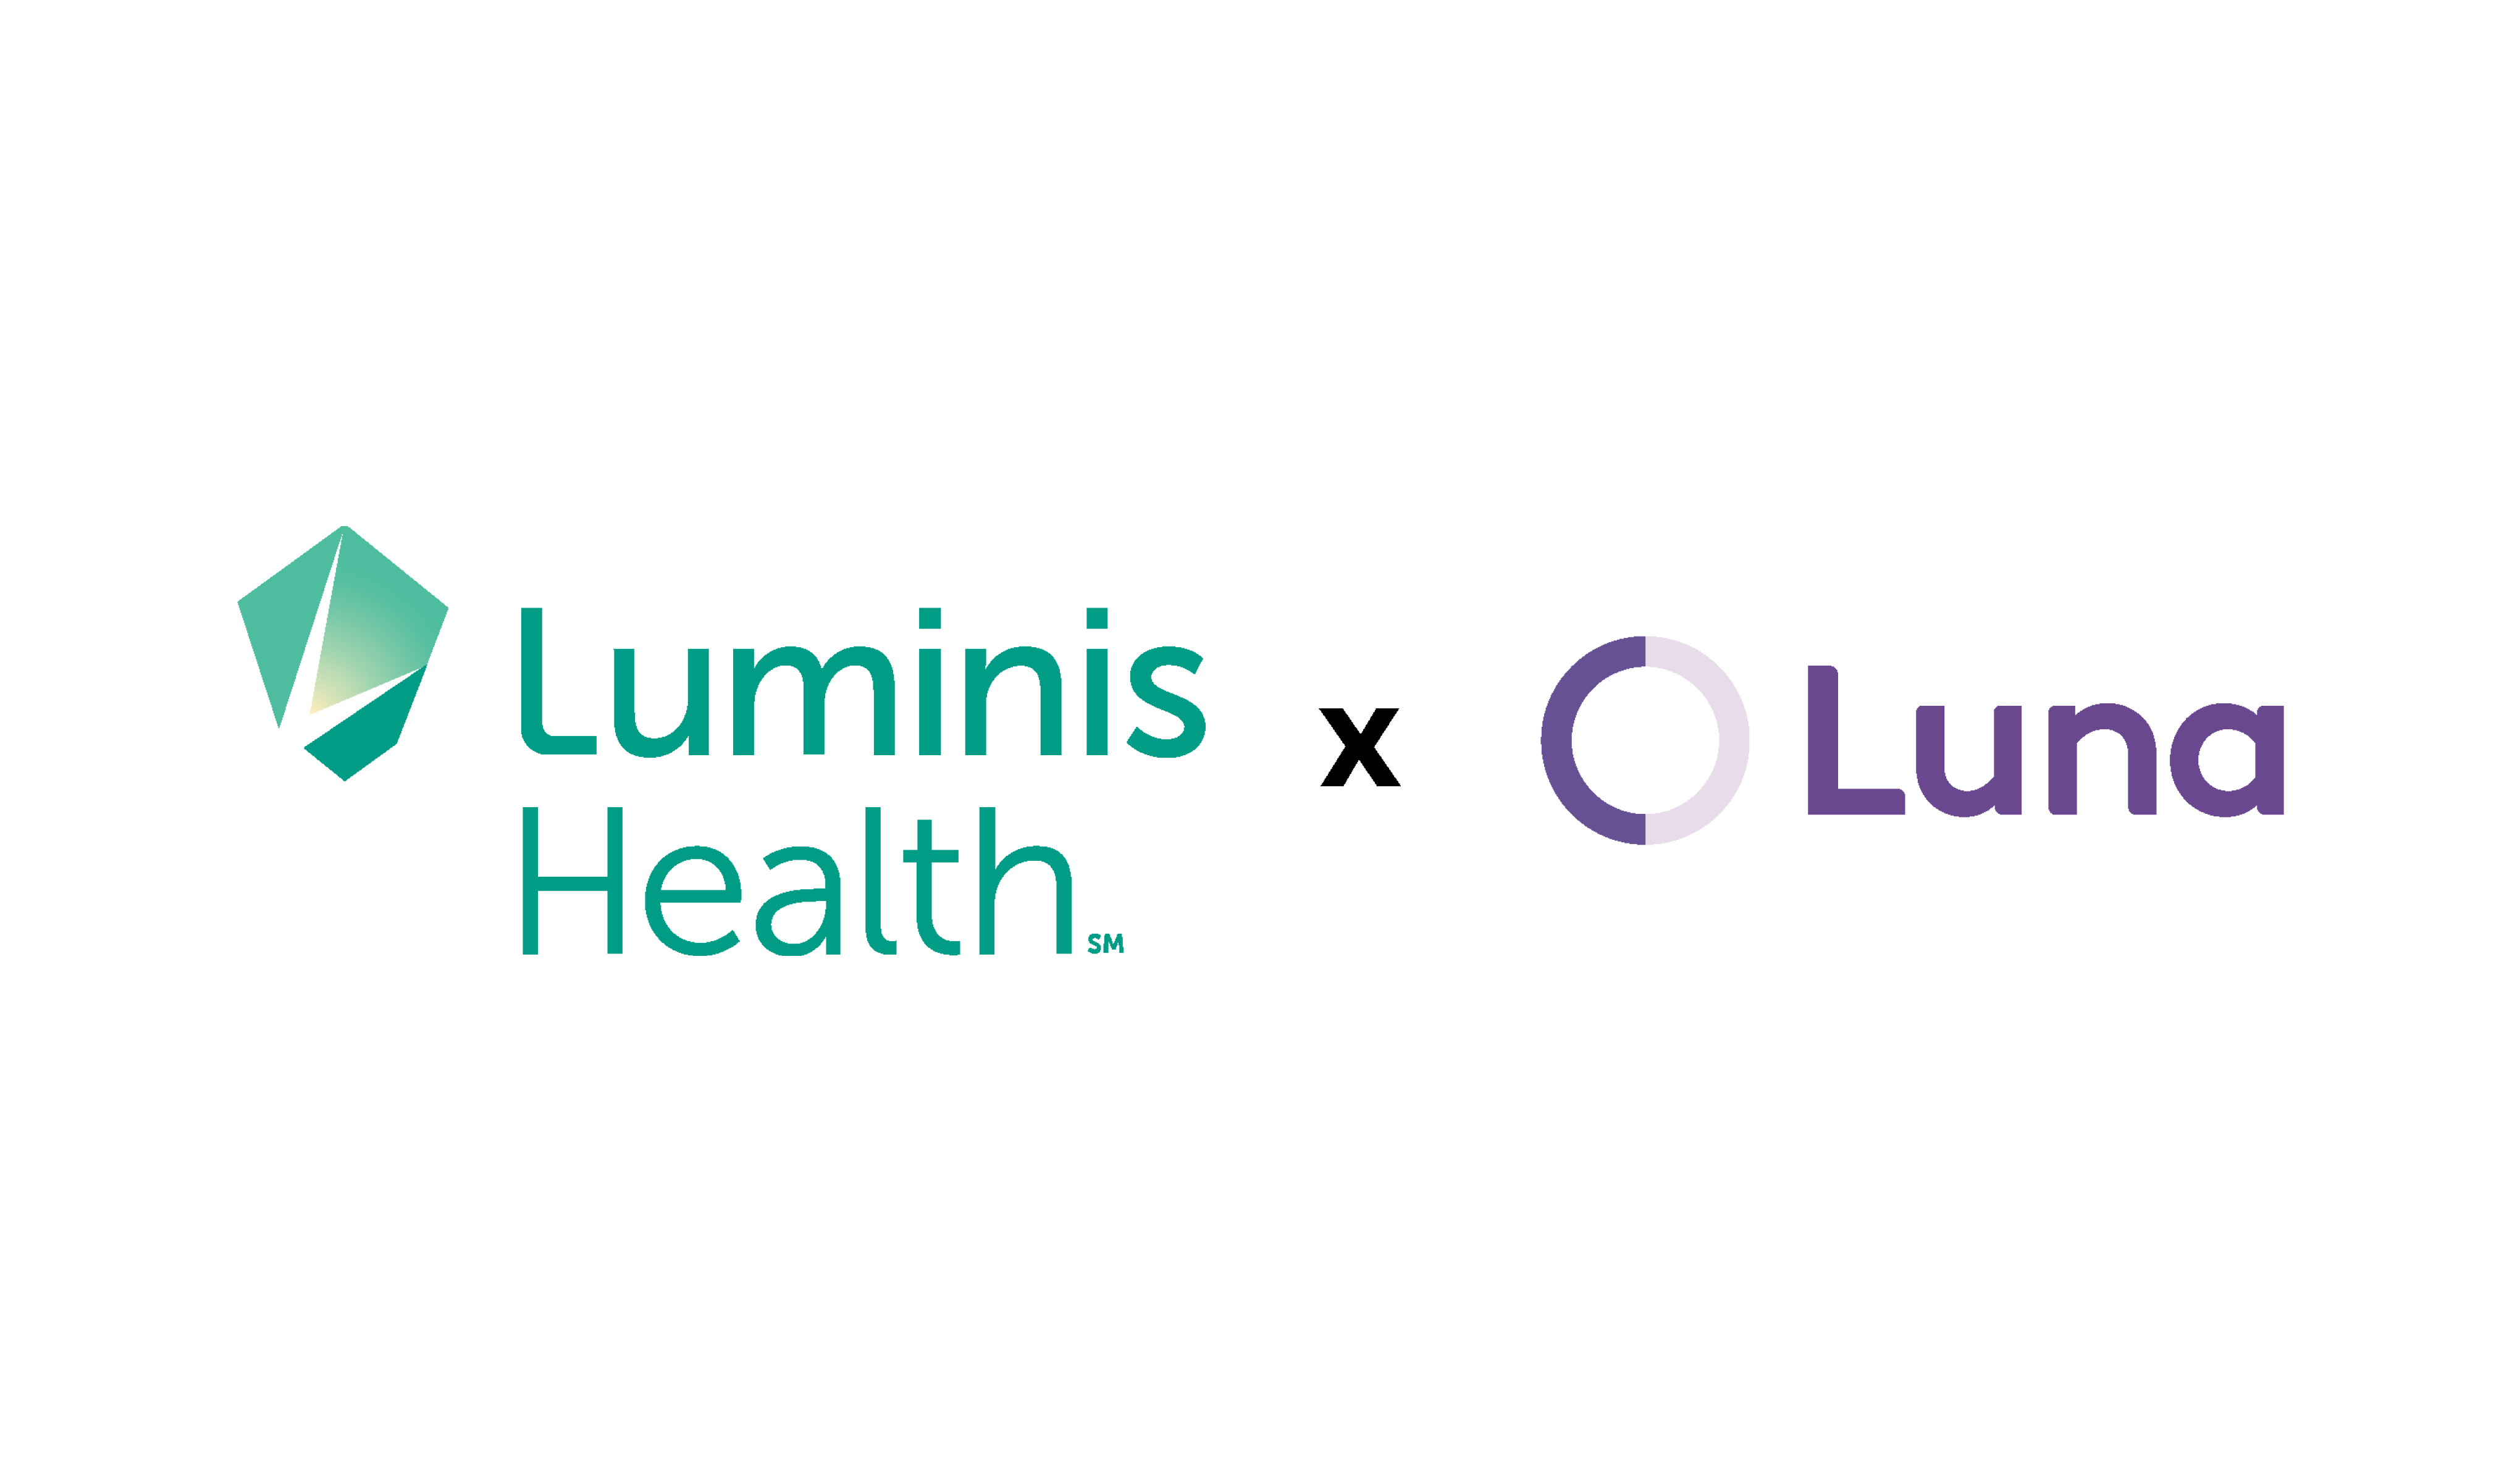 Luminis Health Partners with Luna to Expand Access to In-Home, Outpatient Physical Therapy Services